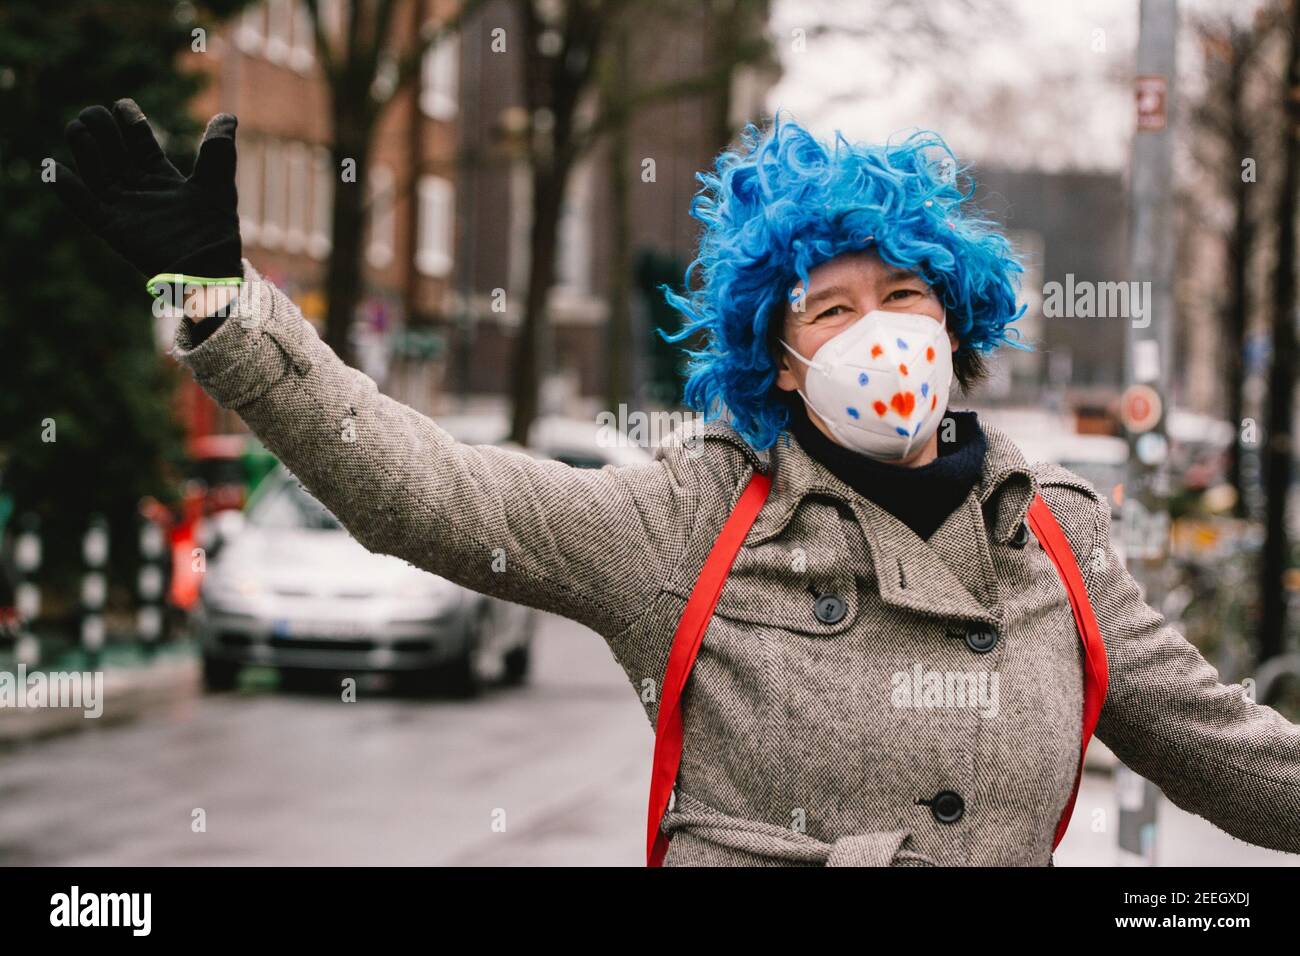 Dusseldorf, Germany. 15th Feb, 2021. A woman with facial mask dresses up during the German carnival season amid COVID-19 pandemic in Dusseldorf, Germany, Feb. 15, 2021. Most of the traditional German carnival activities have been cancelled this year due to the COVID-19 pandemic. Some people dressed up here with sufficient COVID-19 prevention and control measures on Monday. Credit: Tang Ying/Xinhua/Alamy Live News Stock Photo